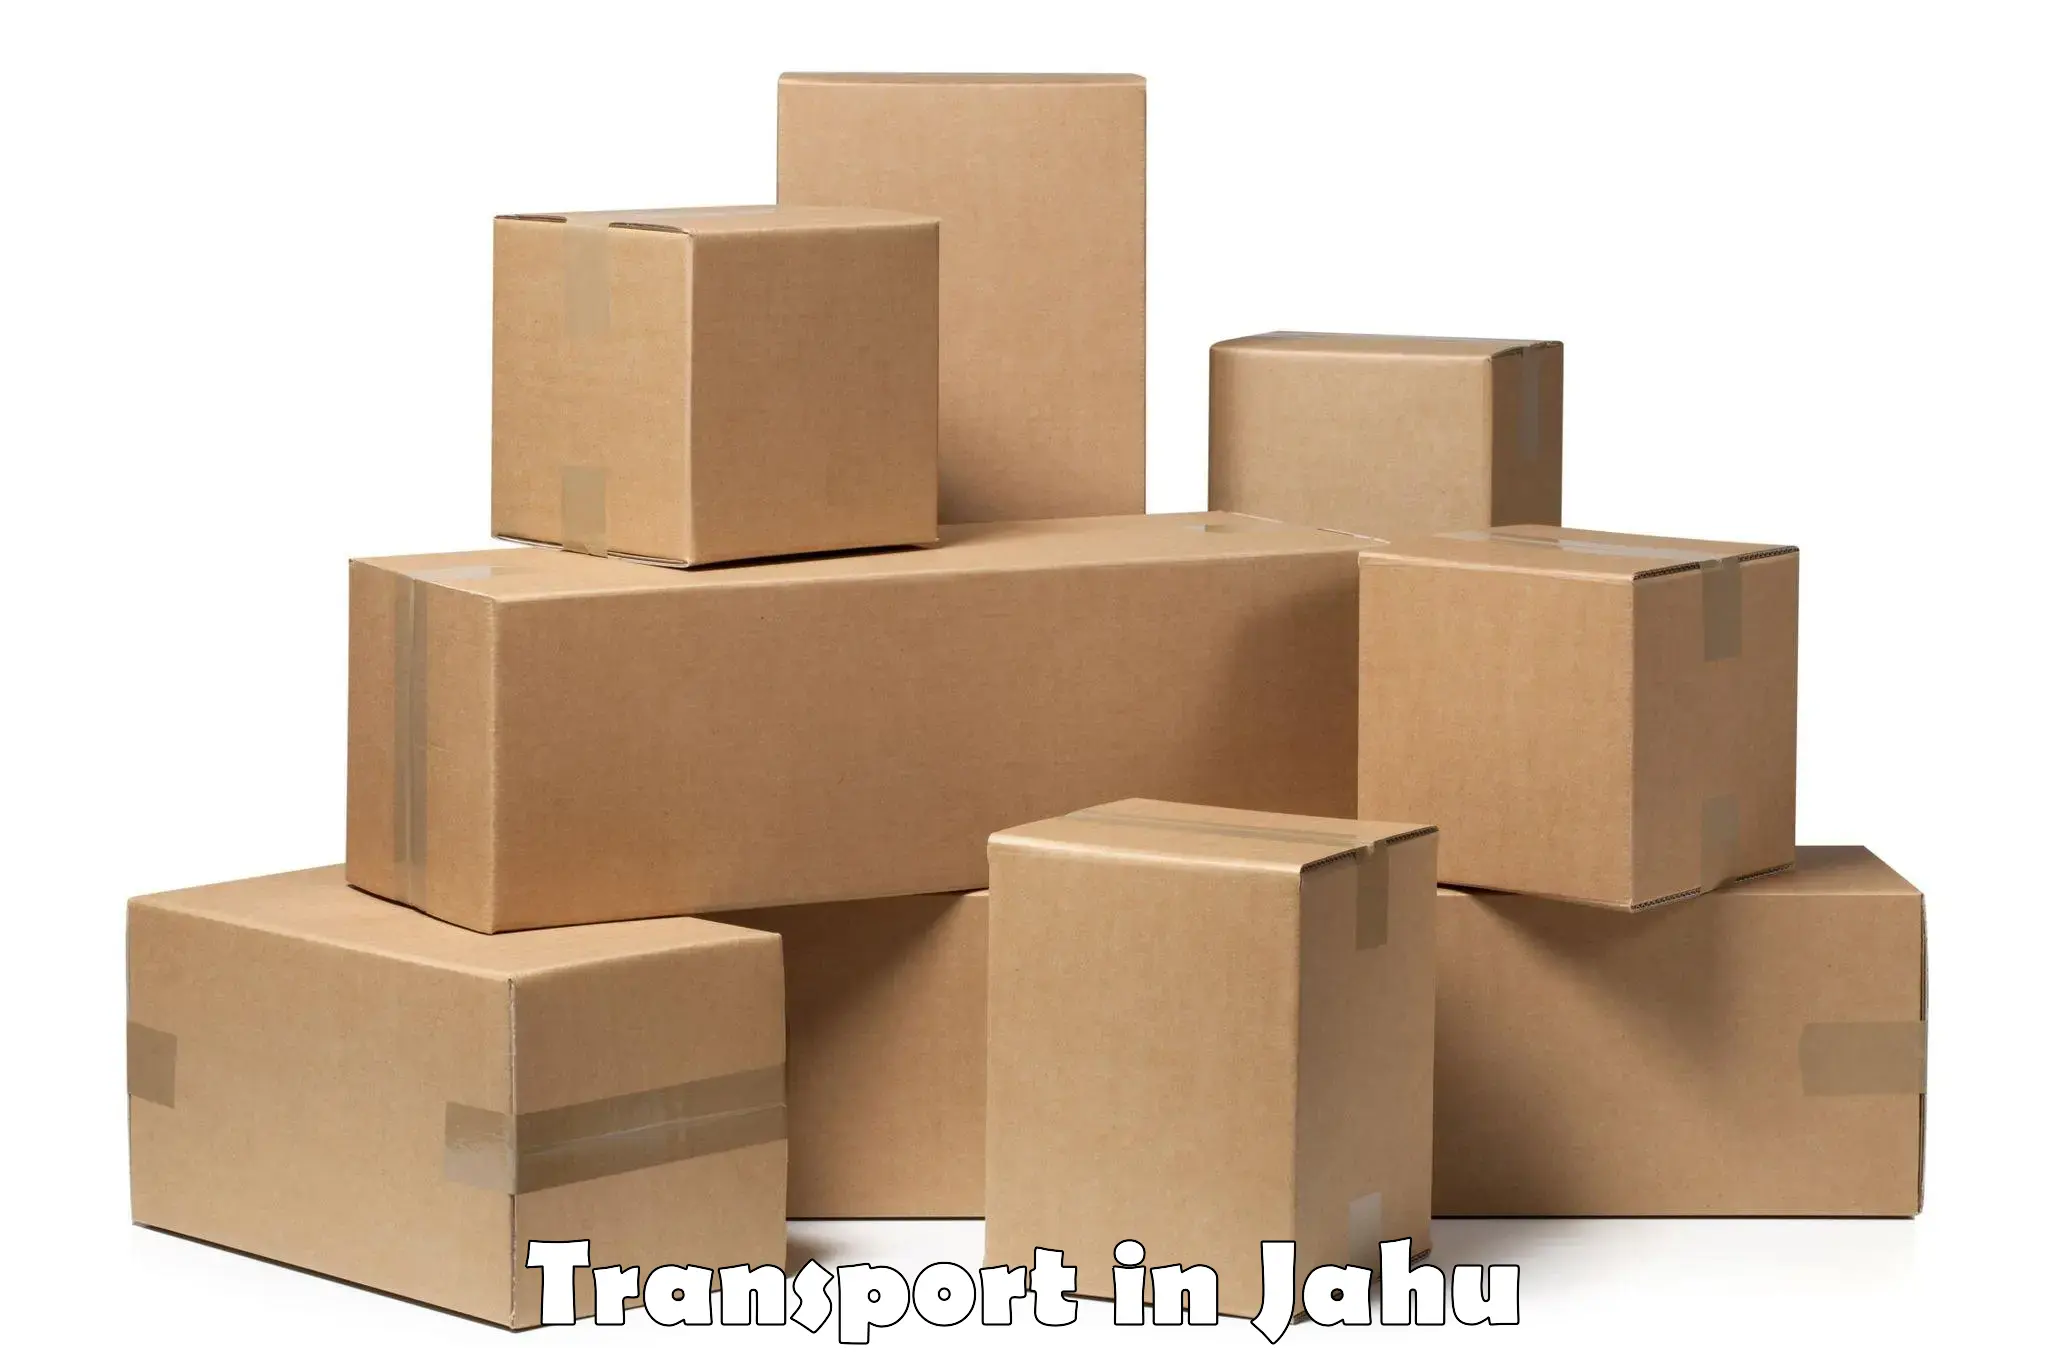 Cargo train transport services in Jahu